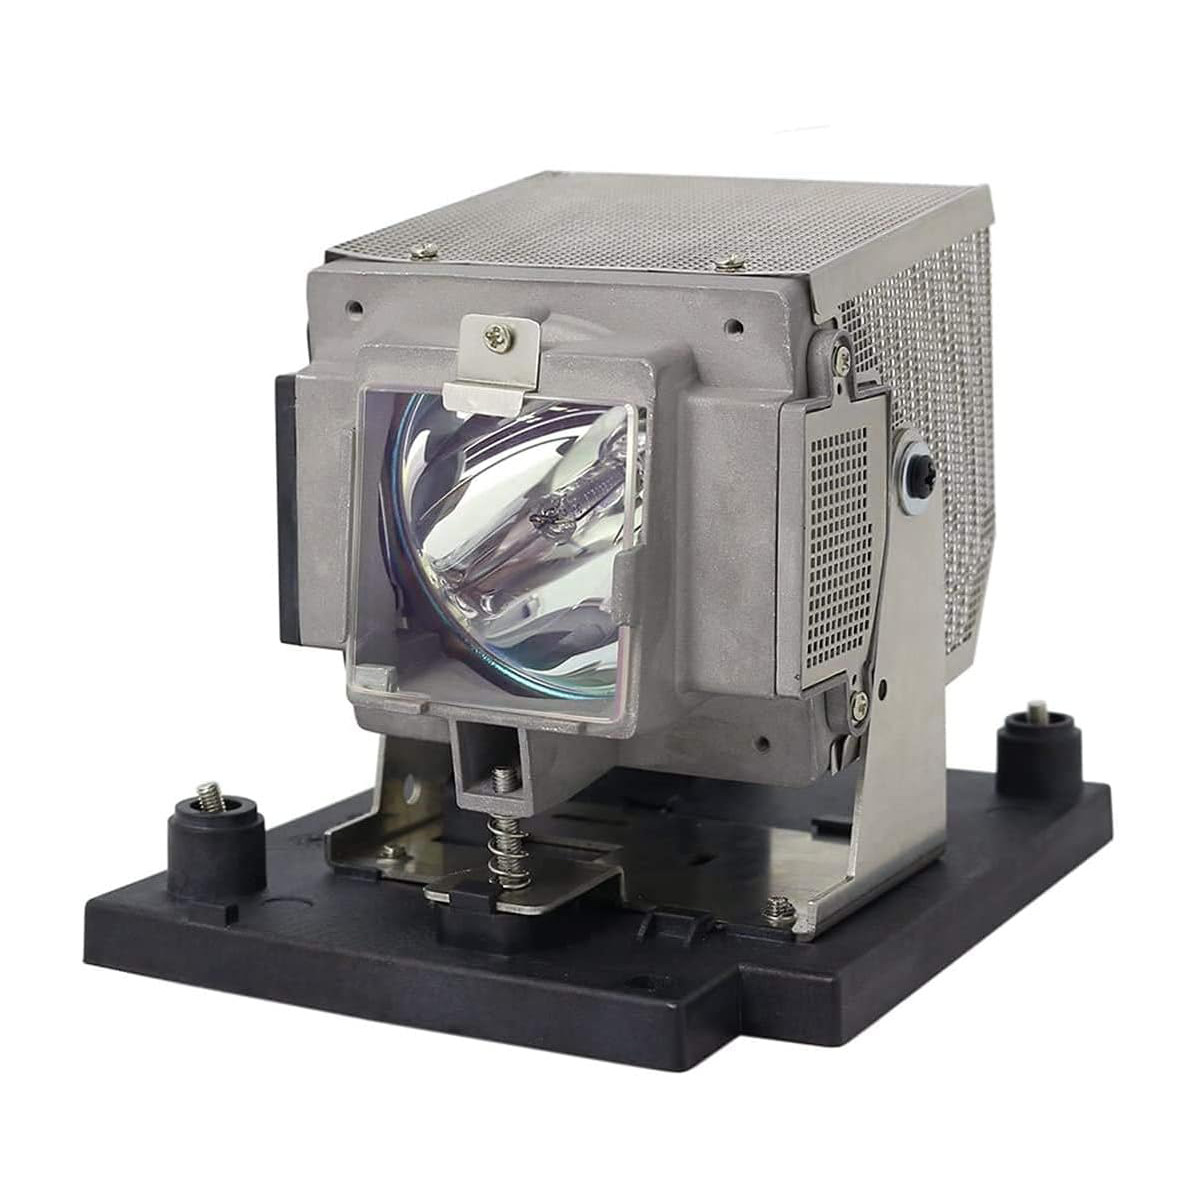 Replacement Projector lamp AN-PH7LP2 fOR SHARP XG-PH70X